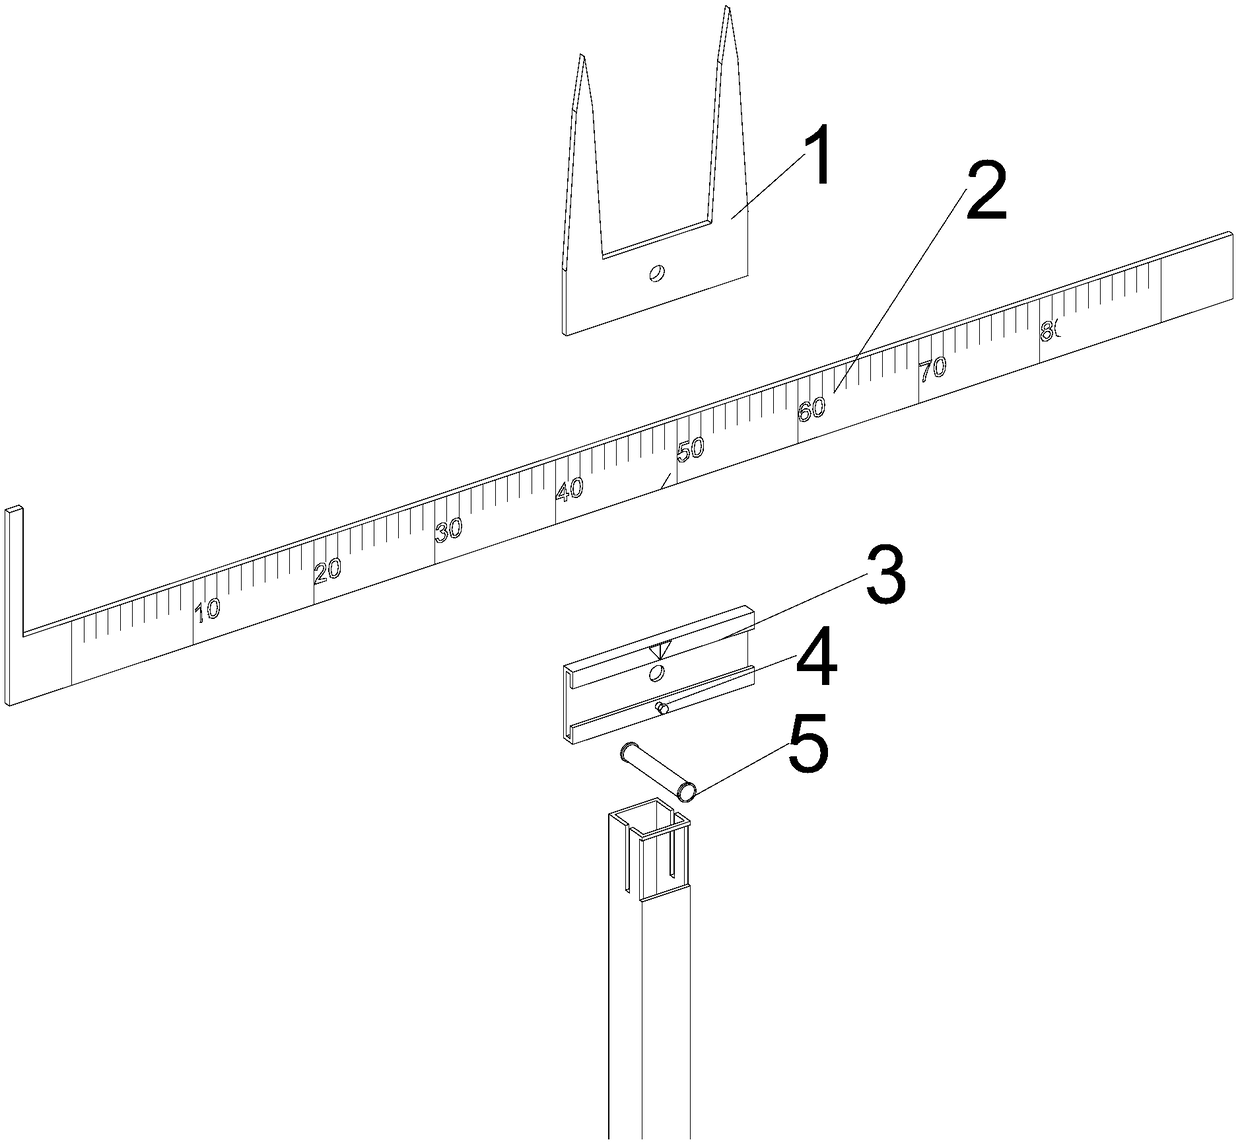 I-shaped wooden beam quick positioning and mounting device